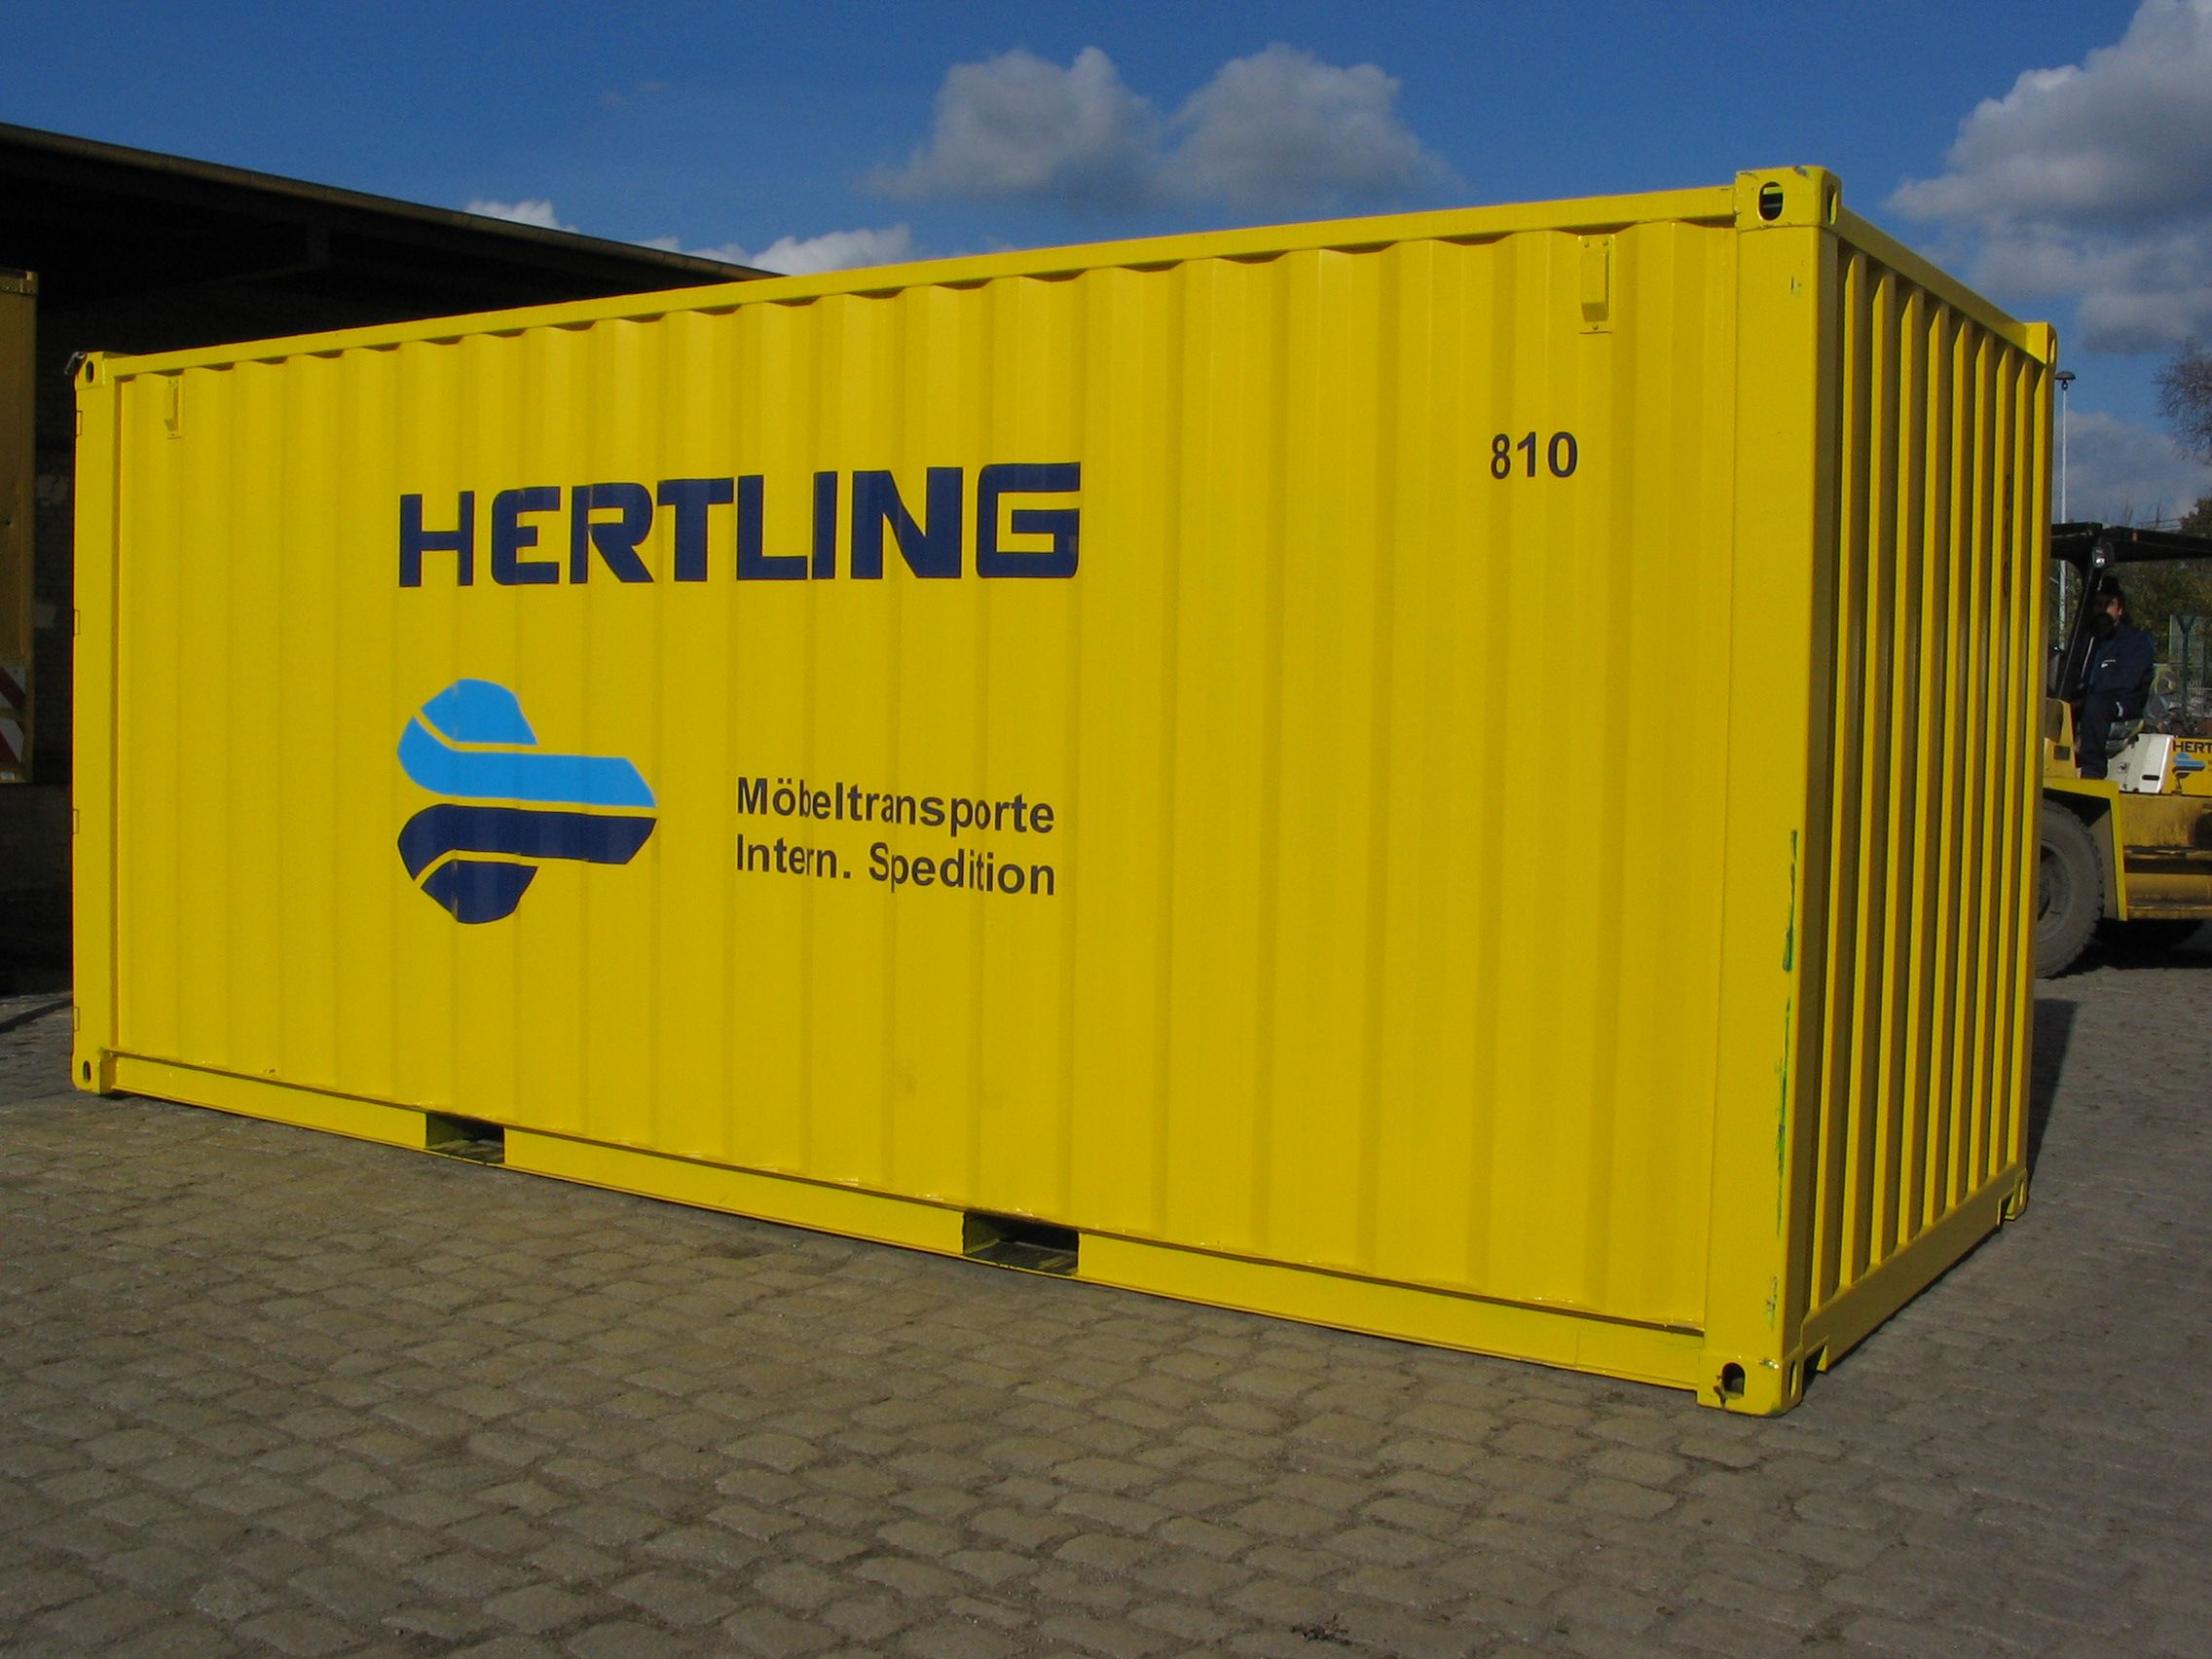 HERTLING storage container